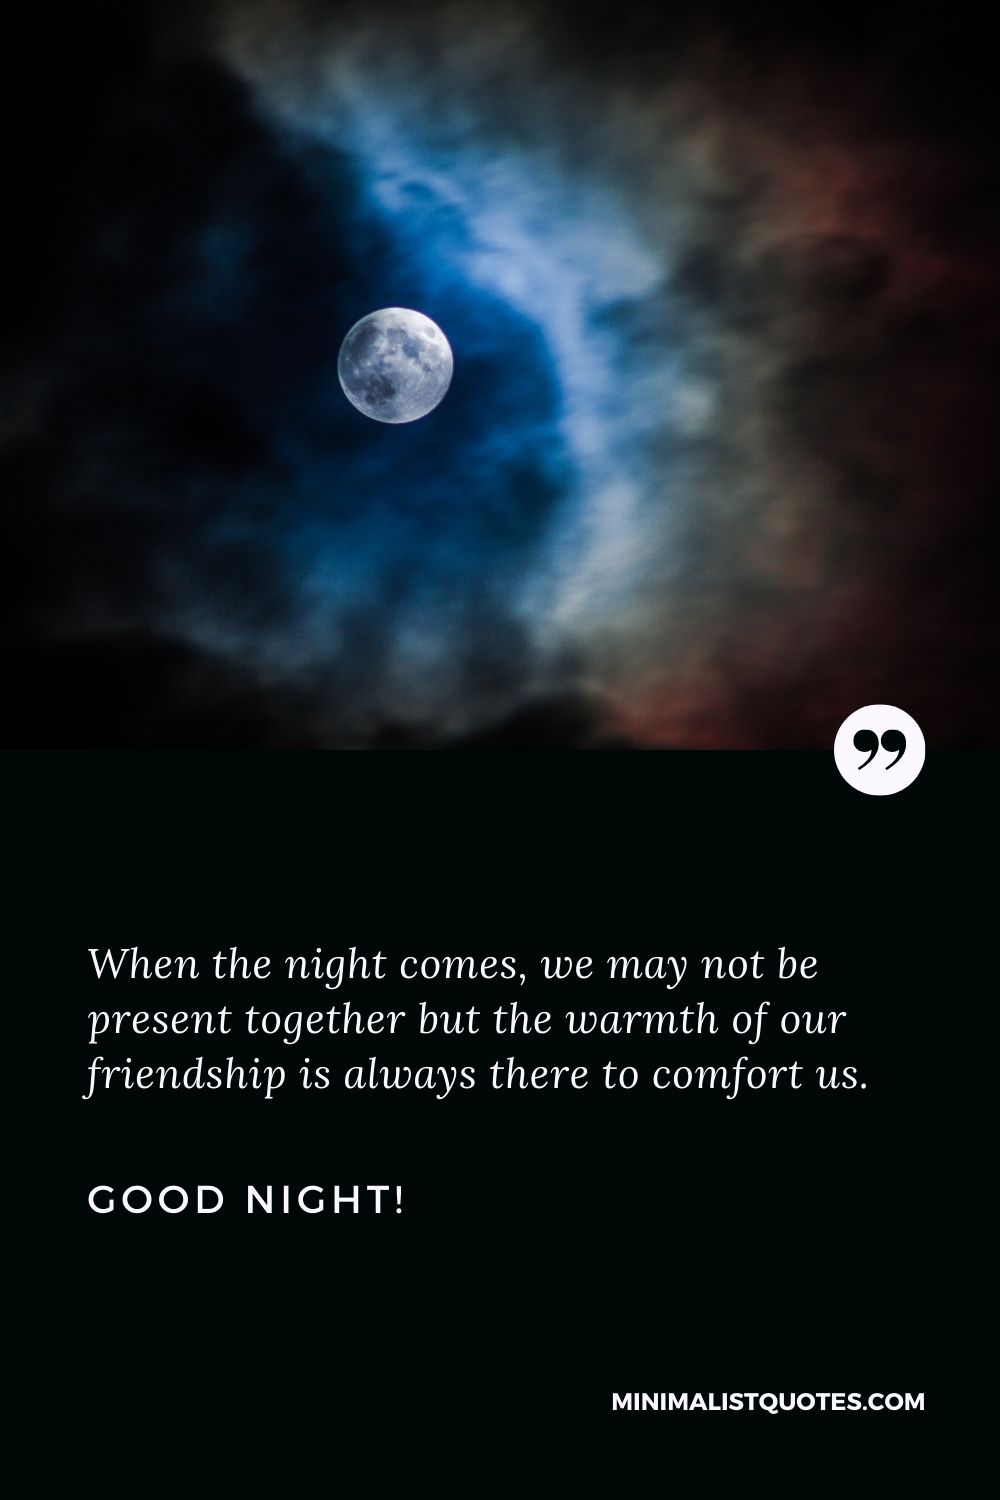 Good night my friend: When the night comes, we may not be present together but the warmth of our friendship is always there to comfort us. Good Night!